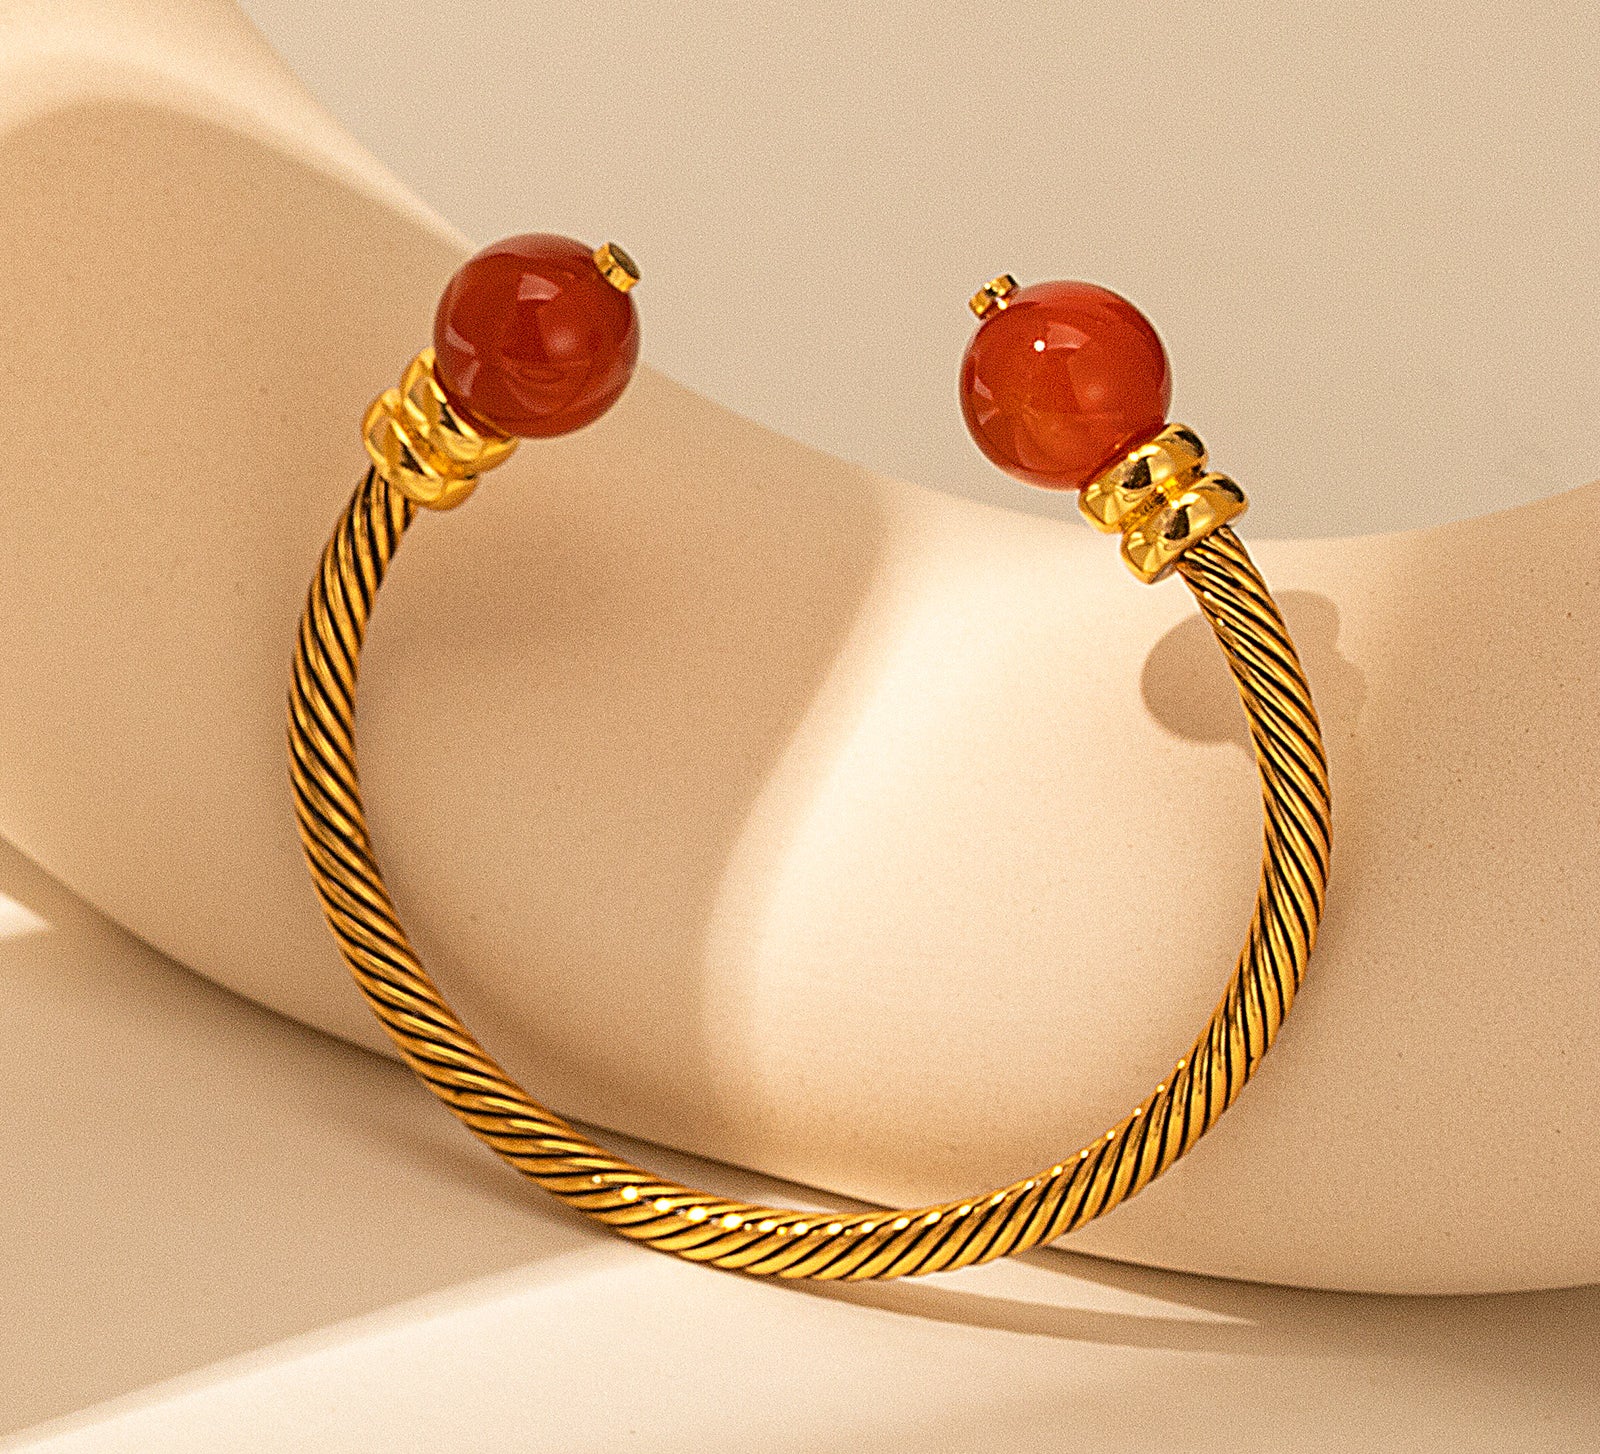 Vintage Agate Bracelet, sculpted to perfection with gold details, this bracelet showcases the opulence of red agate gemstones, making it a statement piece for any occasion